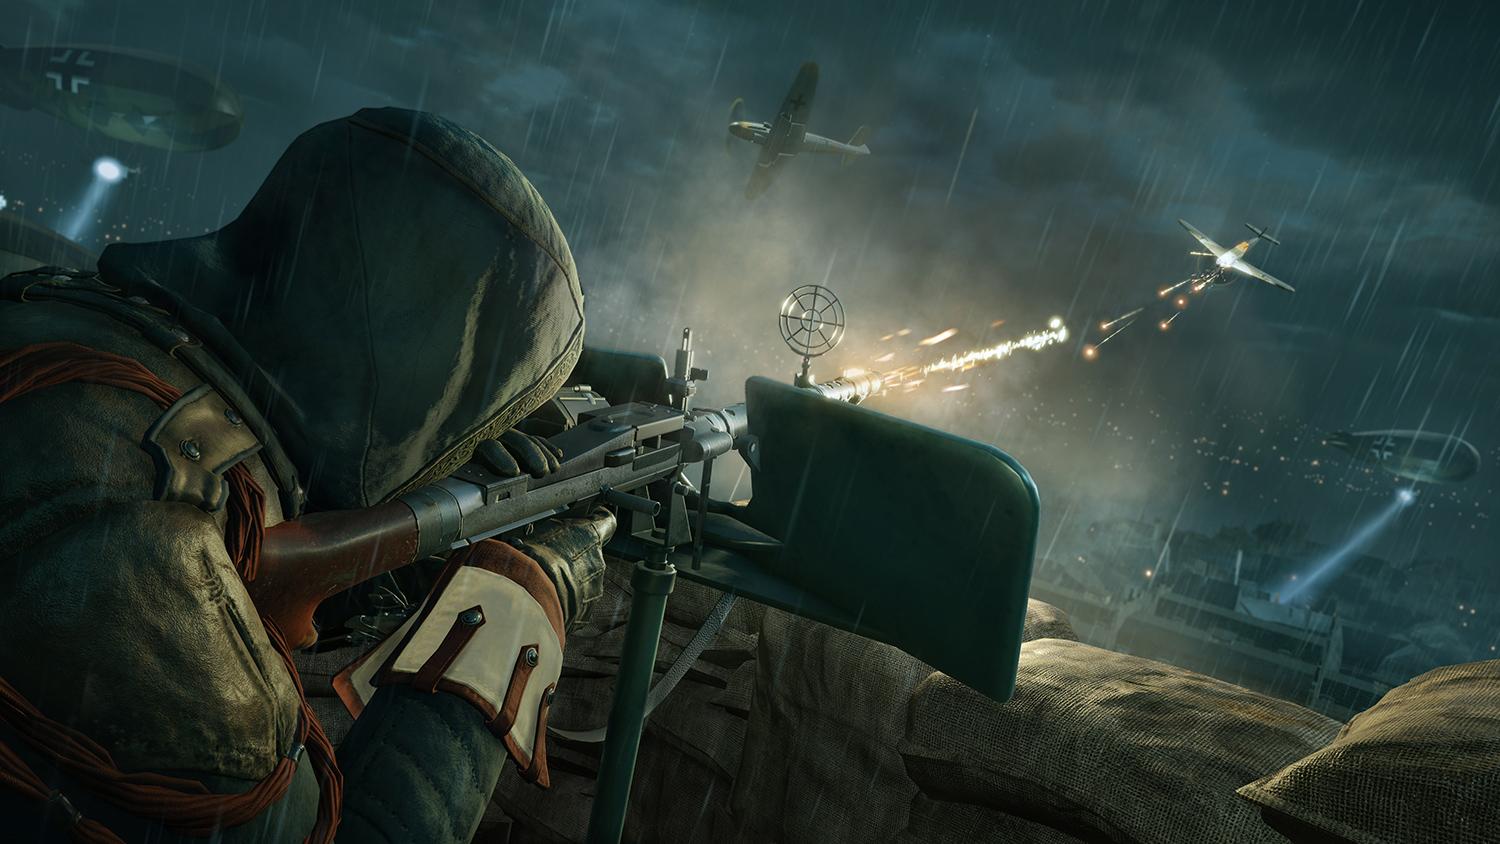 Assassins Creed: Unity Reviews, Pros and Cons